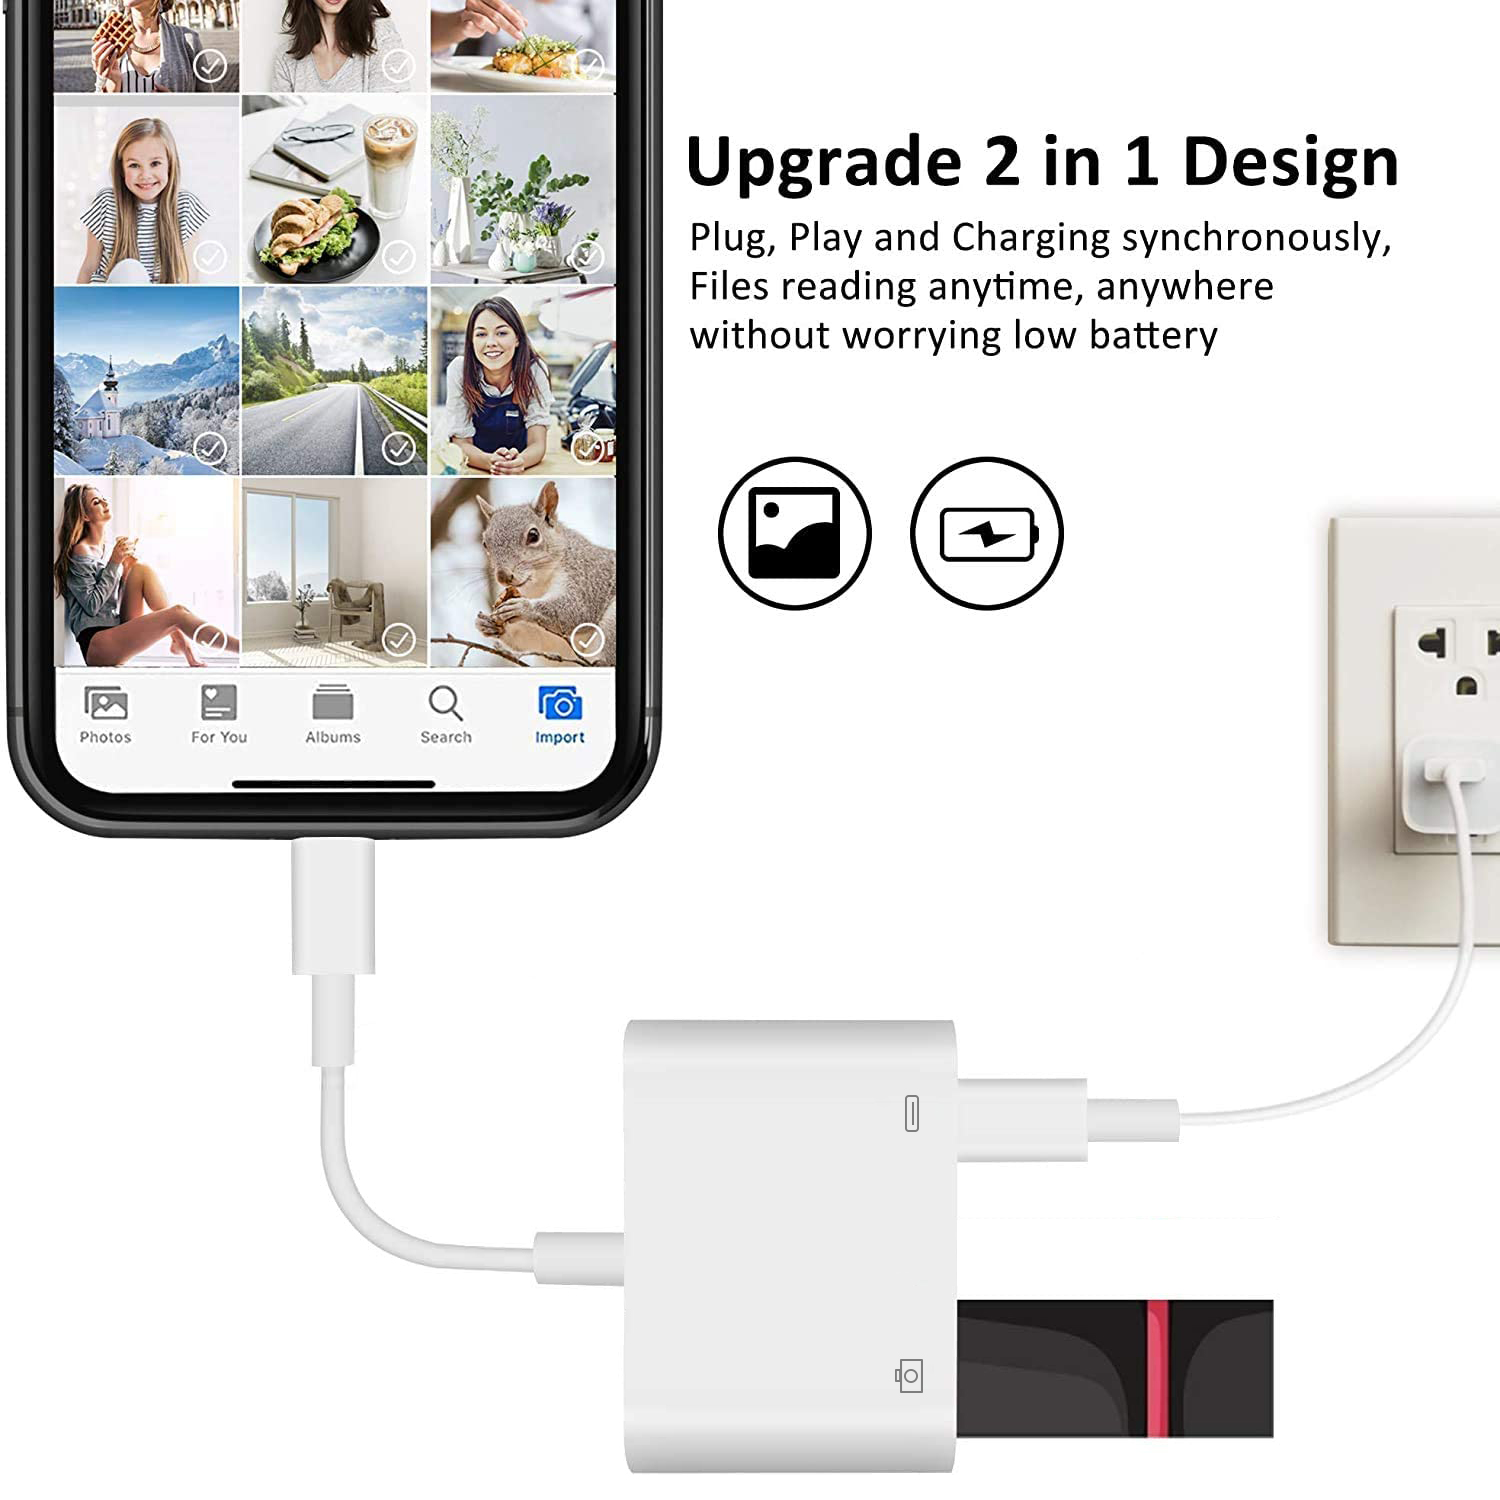  Apple Lightning to USB Camera Adapter, USB 3.0 OTG Cable for  iPhone/iPad to Connect Card Reader, USB Flash Drive, U Disk, Keyboard,  Mouse, Hubs, MIDI, Plug & Play (White) : Electronics